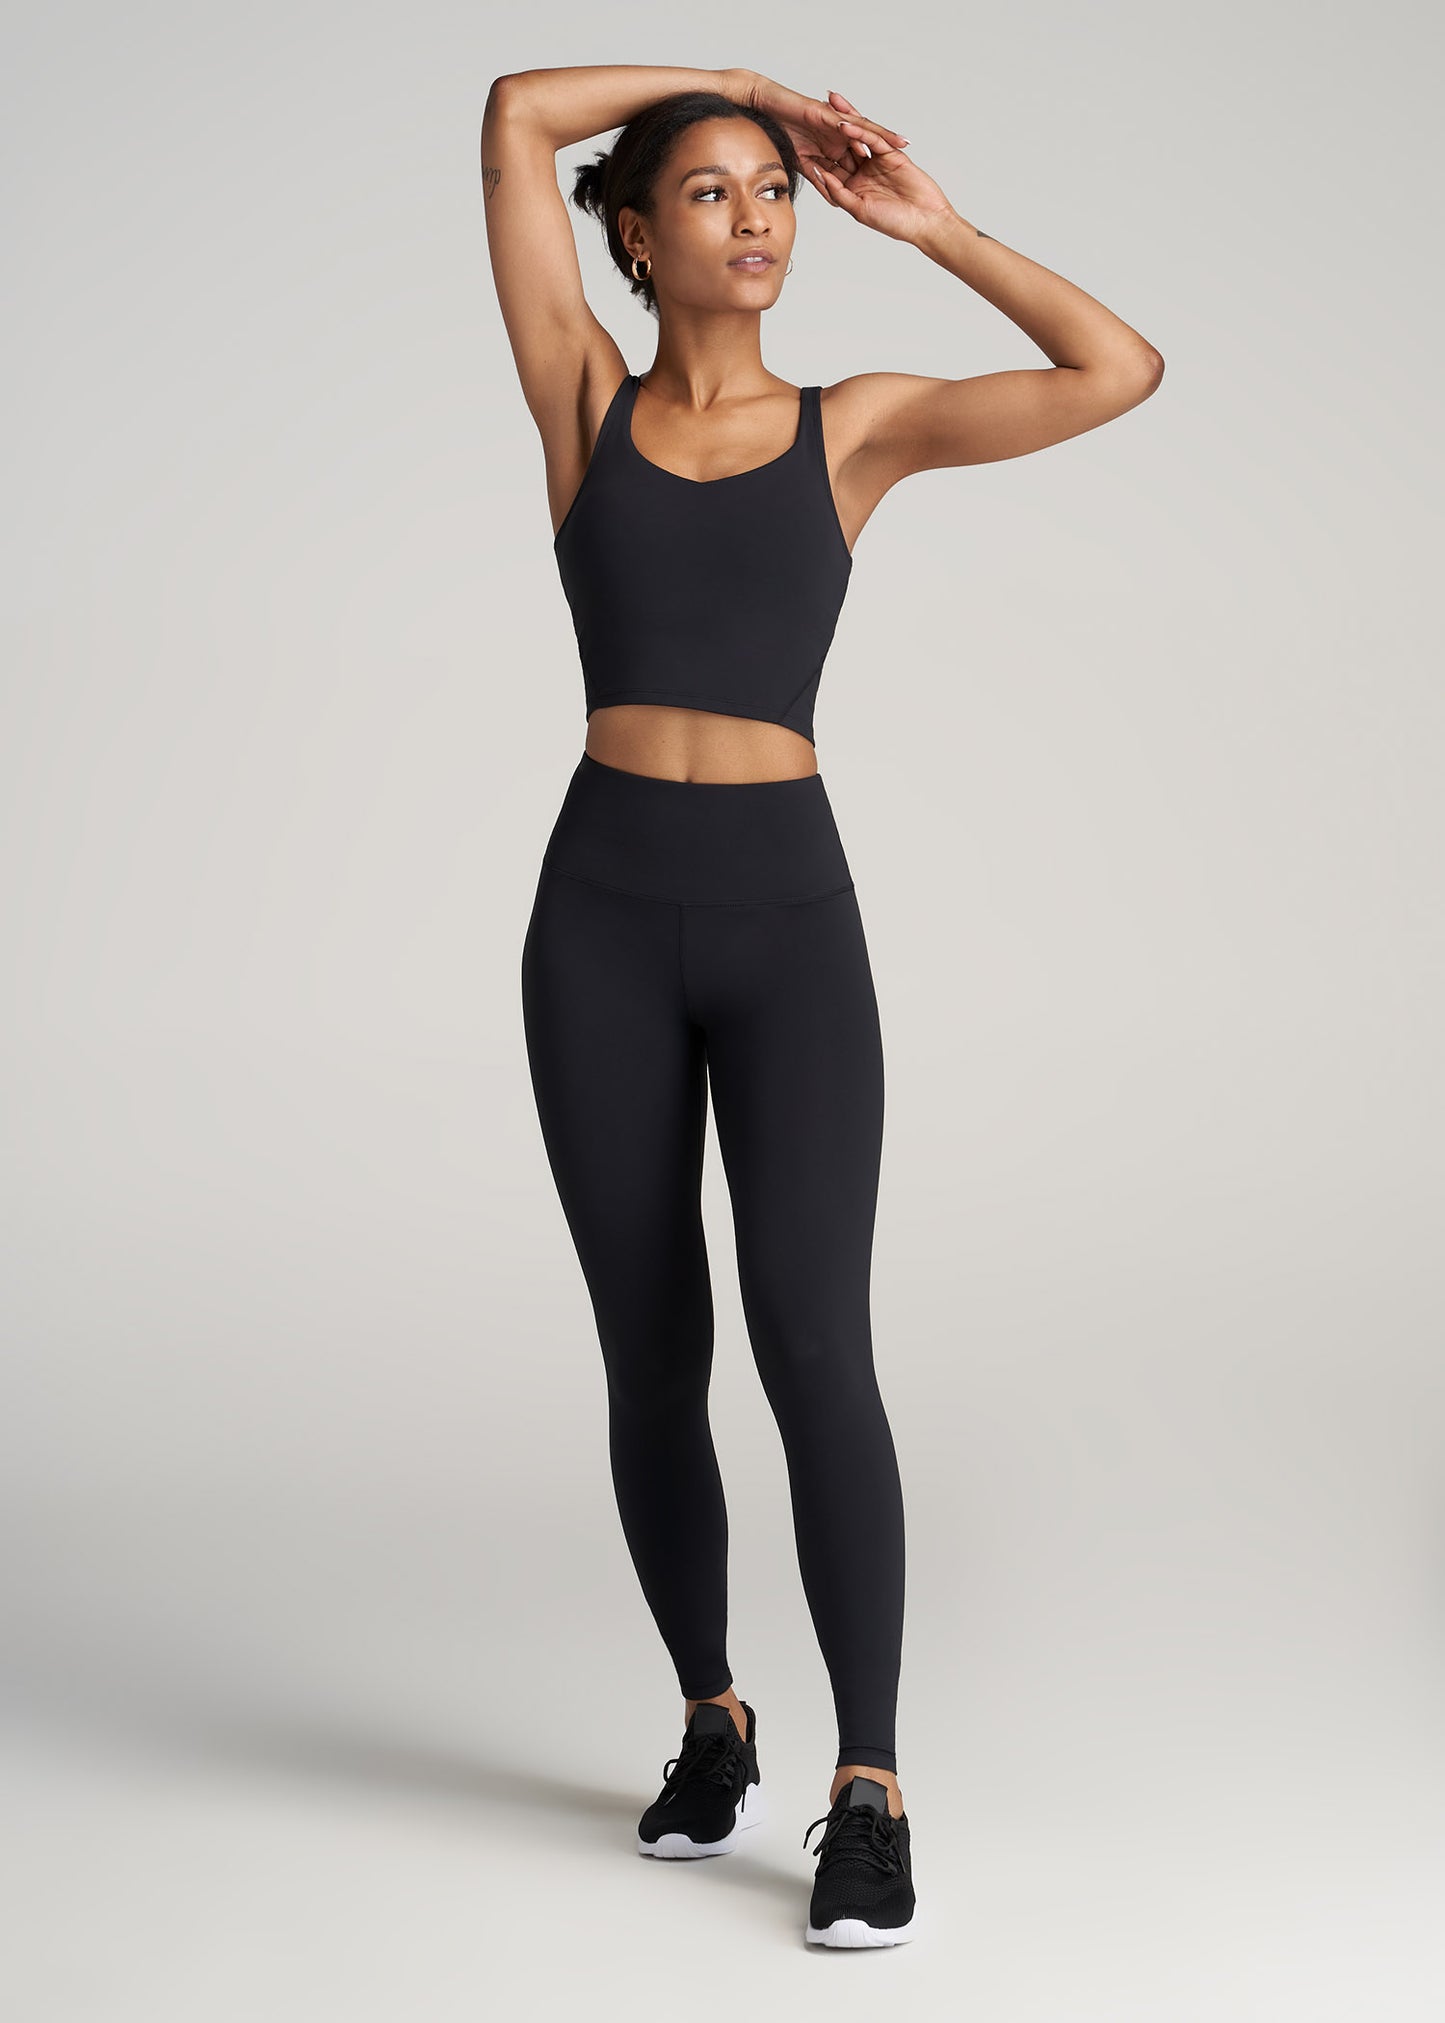 What to Wear with Leggings: 25 Stylish Looks for Tall Women